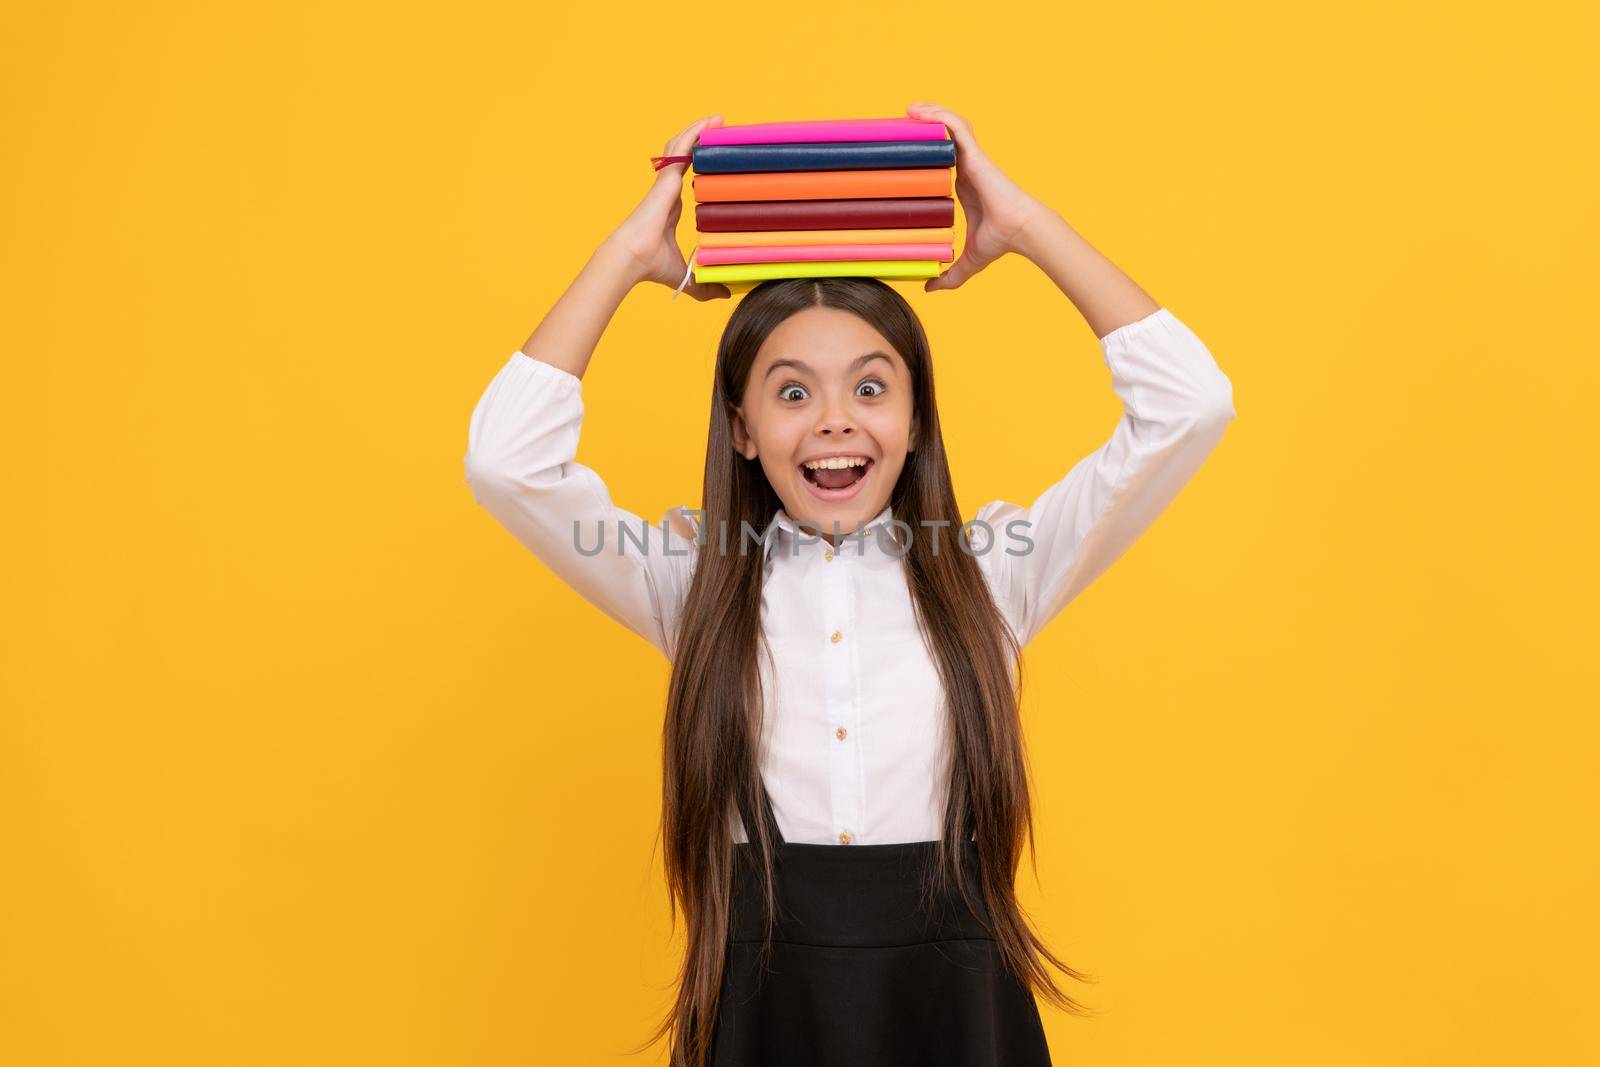 back to school. education. book store. childrens literature. overwhelmed intellectual child. educational literature. bookish kid in grammar school. surprised teen girl hold books heap. too much work.